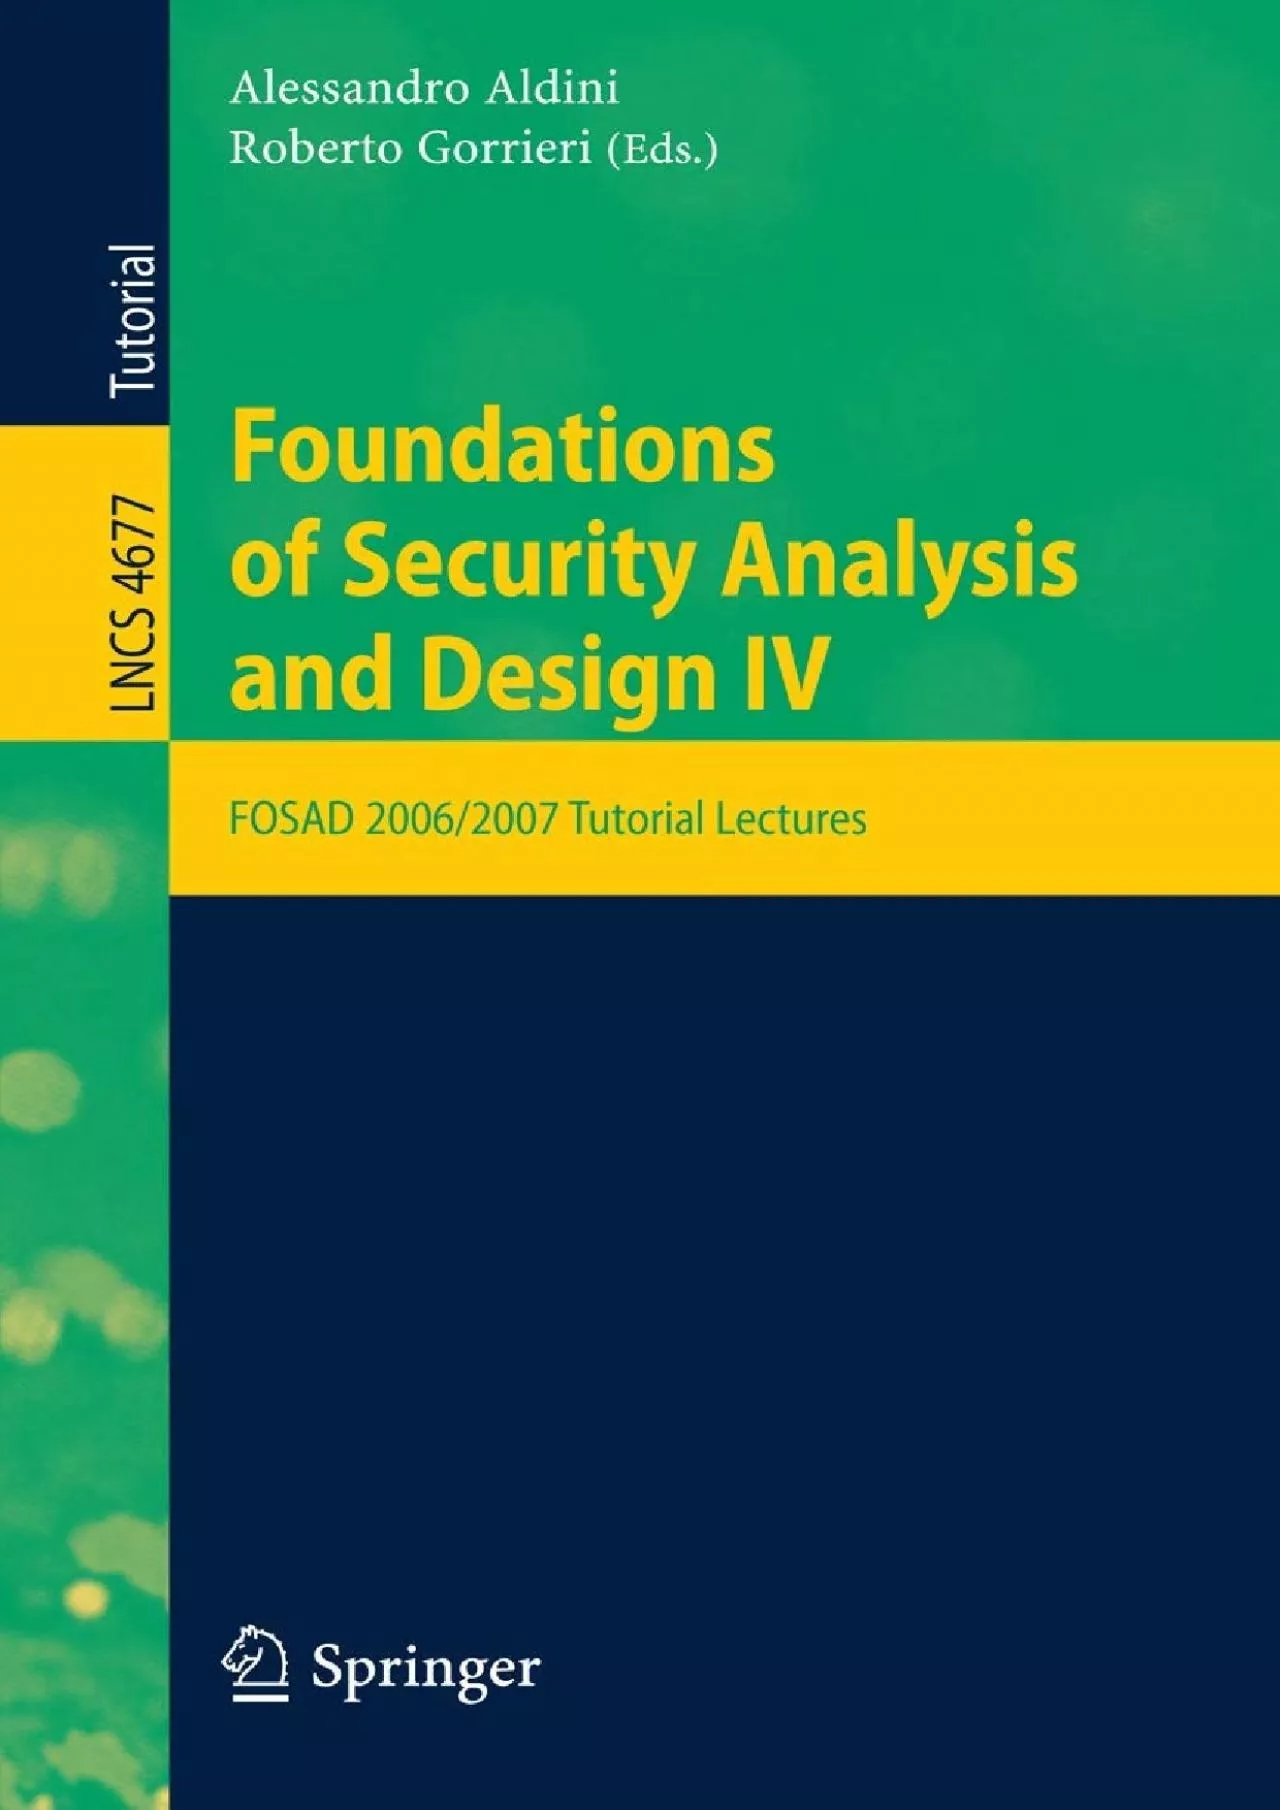 (BOOK)-Foundations of Security Analysis and Design: FOSAD 2006/2007 Turtorial Lectures